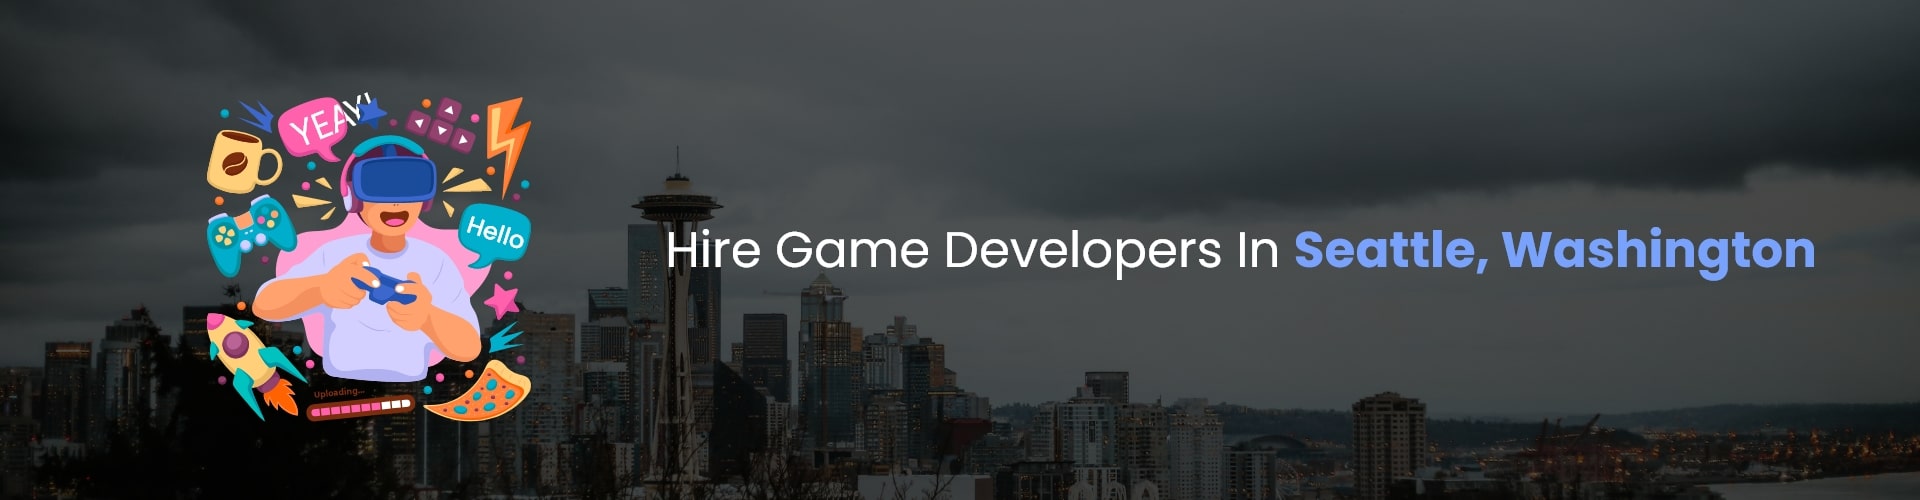 hire game developers in seattle